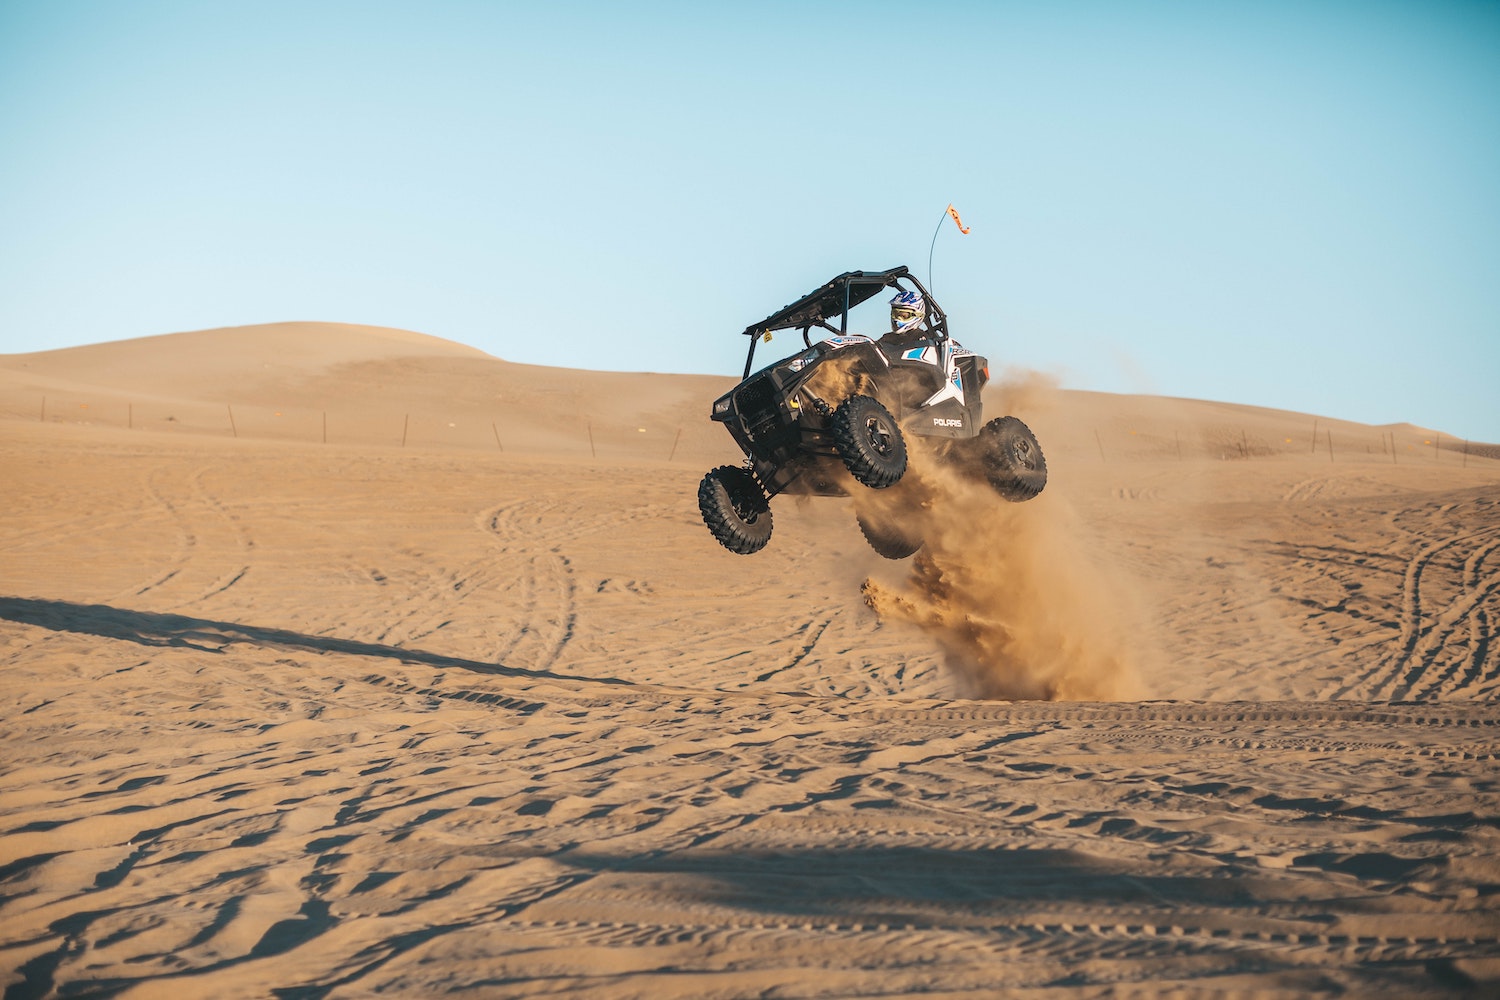 This is a side-by-side ATV taking a jump on the Oceano dunes of Pismo Beach